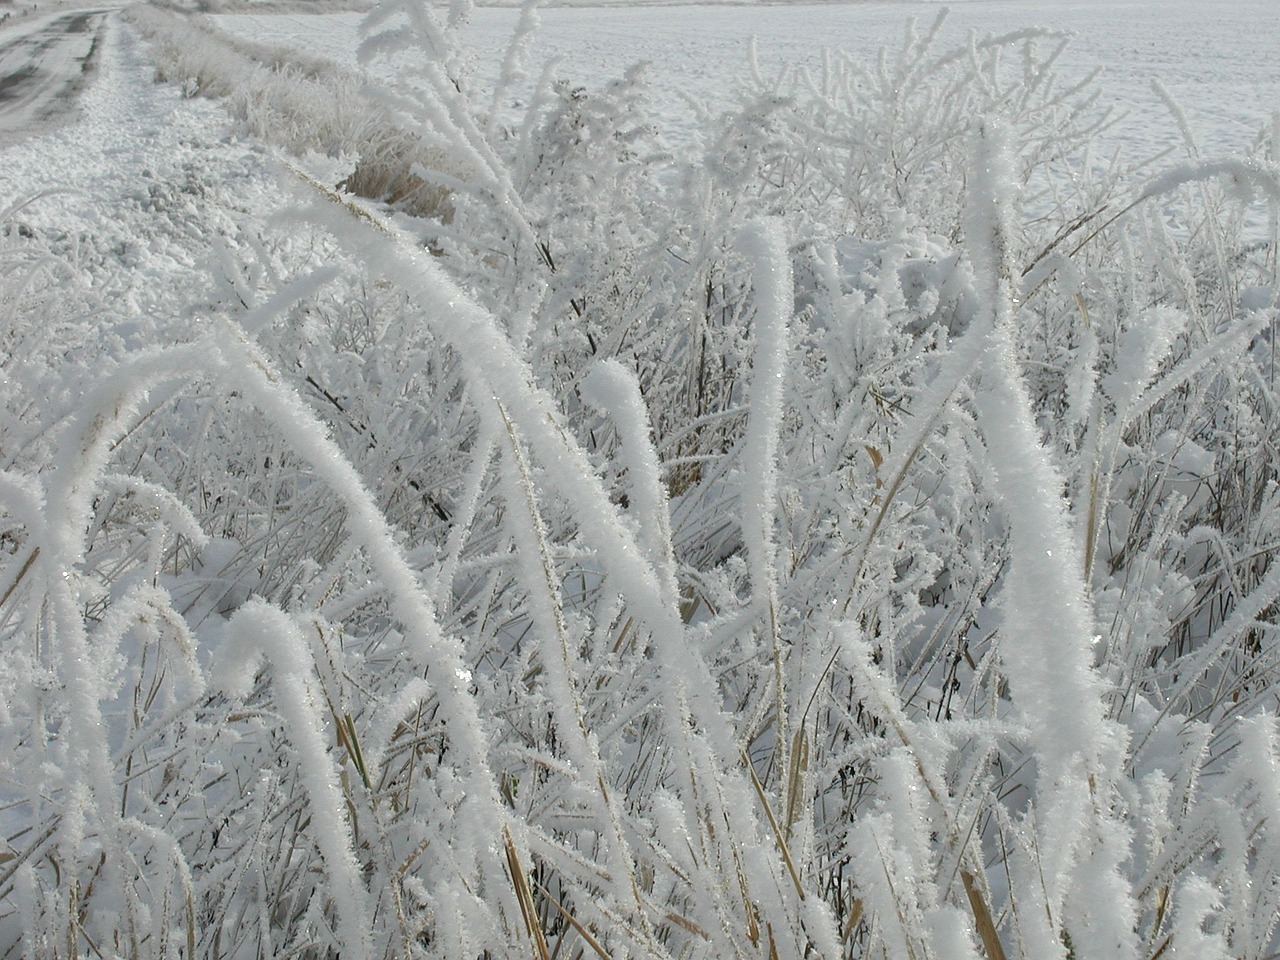 frost,frozen grass,winter,freezing fog,ice,cold,free pictures, free photos, free images, royalty free, free illustrations, public domain